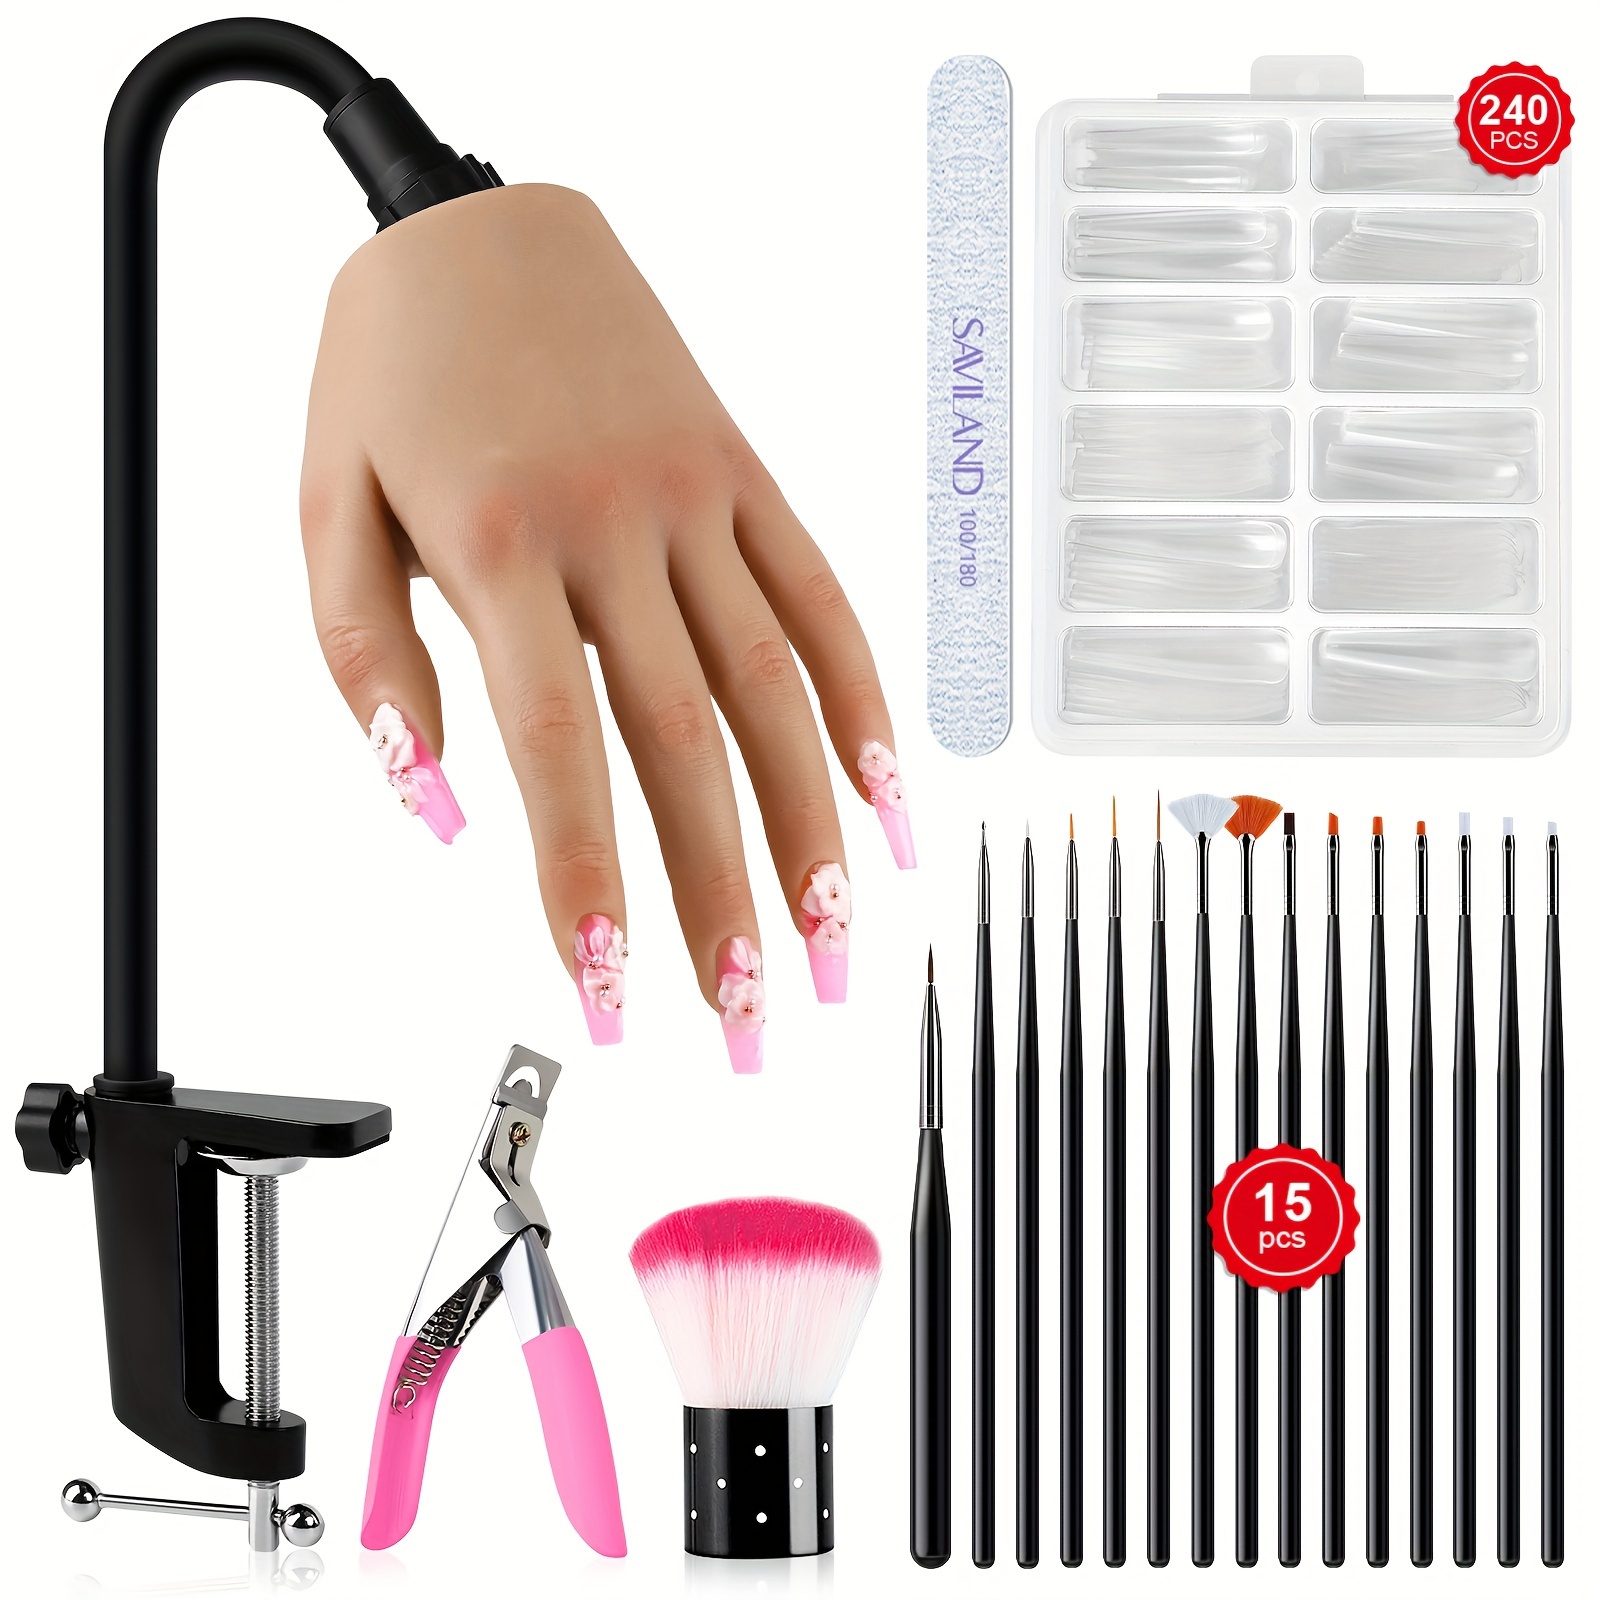 

Saviland Practice Hand For Acrylic Nails: Mannequin Silicone Nail Practice Hand Flexible Nail Hand For Acrylic Nails Practice Nail Tips Nail Art Brushes Set For Beginners Home Training Kit